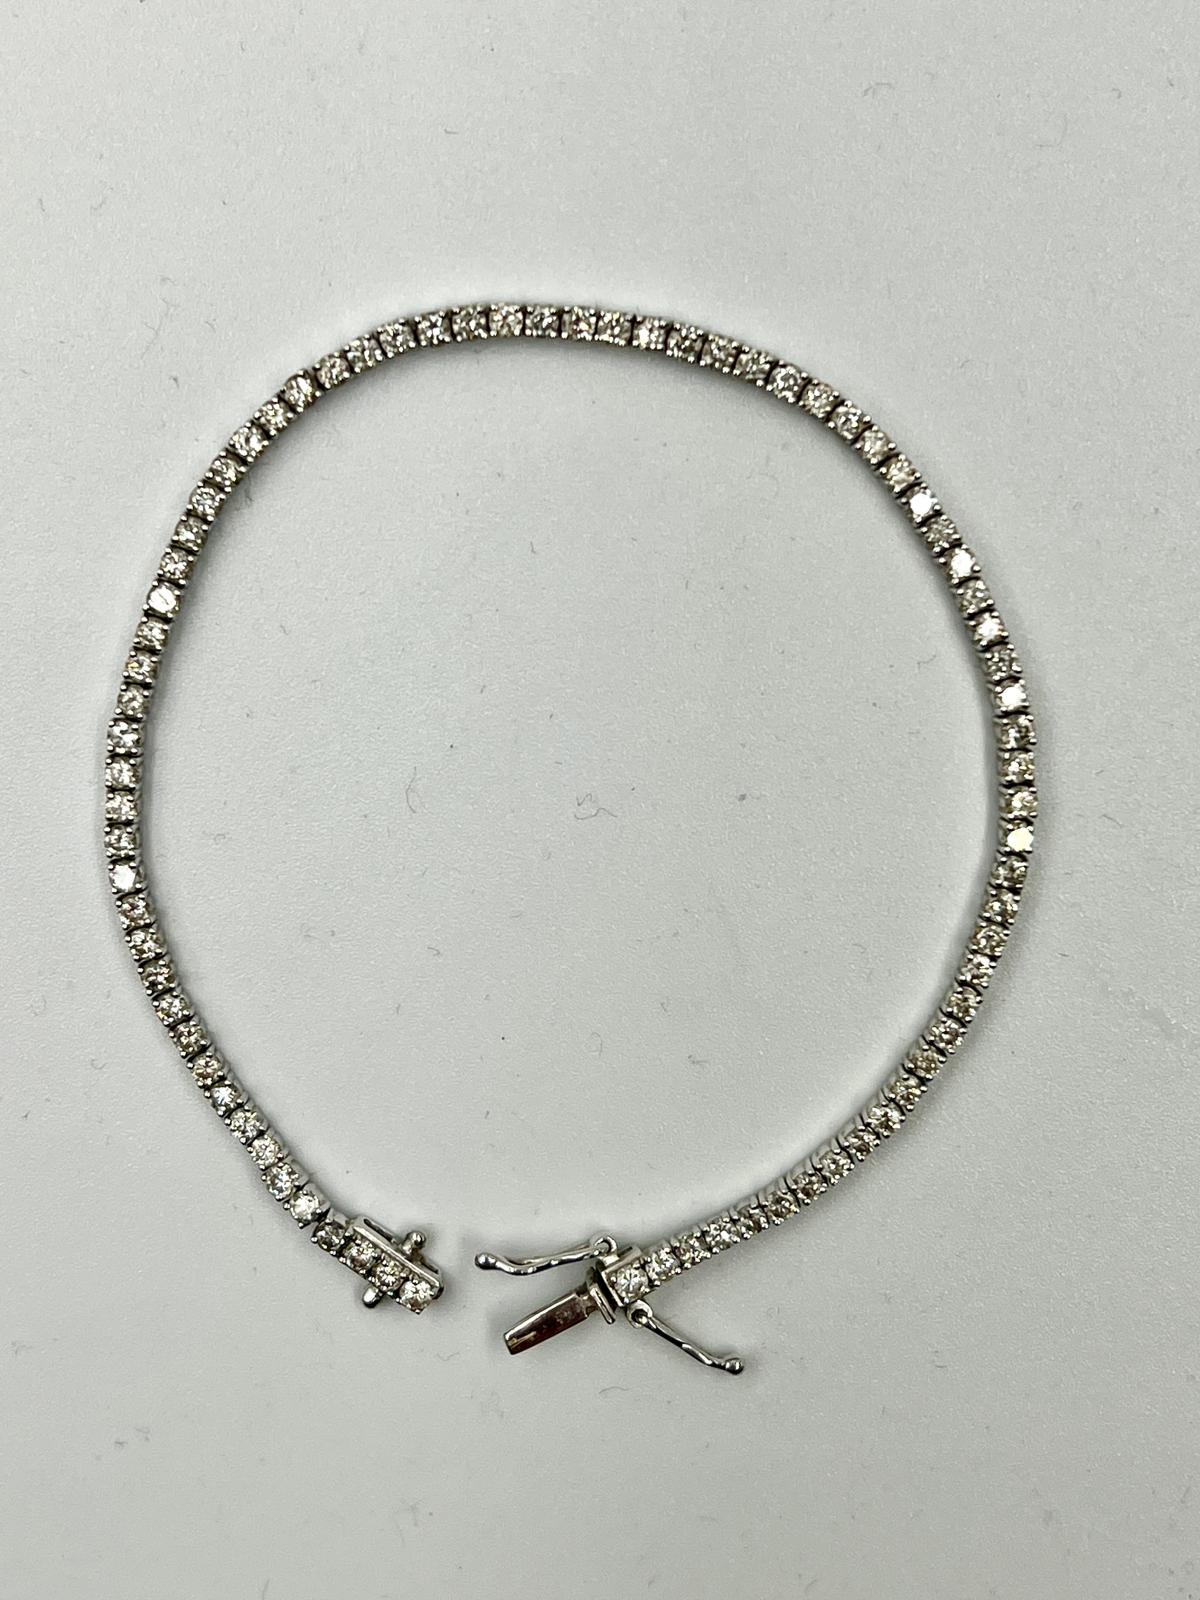 An 18ct white gold Tennis or line bracelet set with approximately 3ct of diamonds. - Image 24 of 25